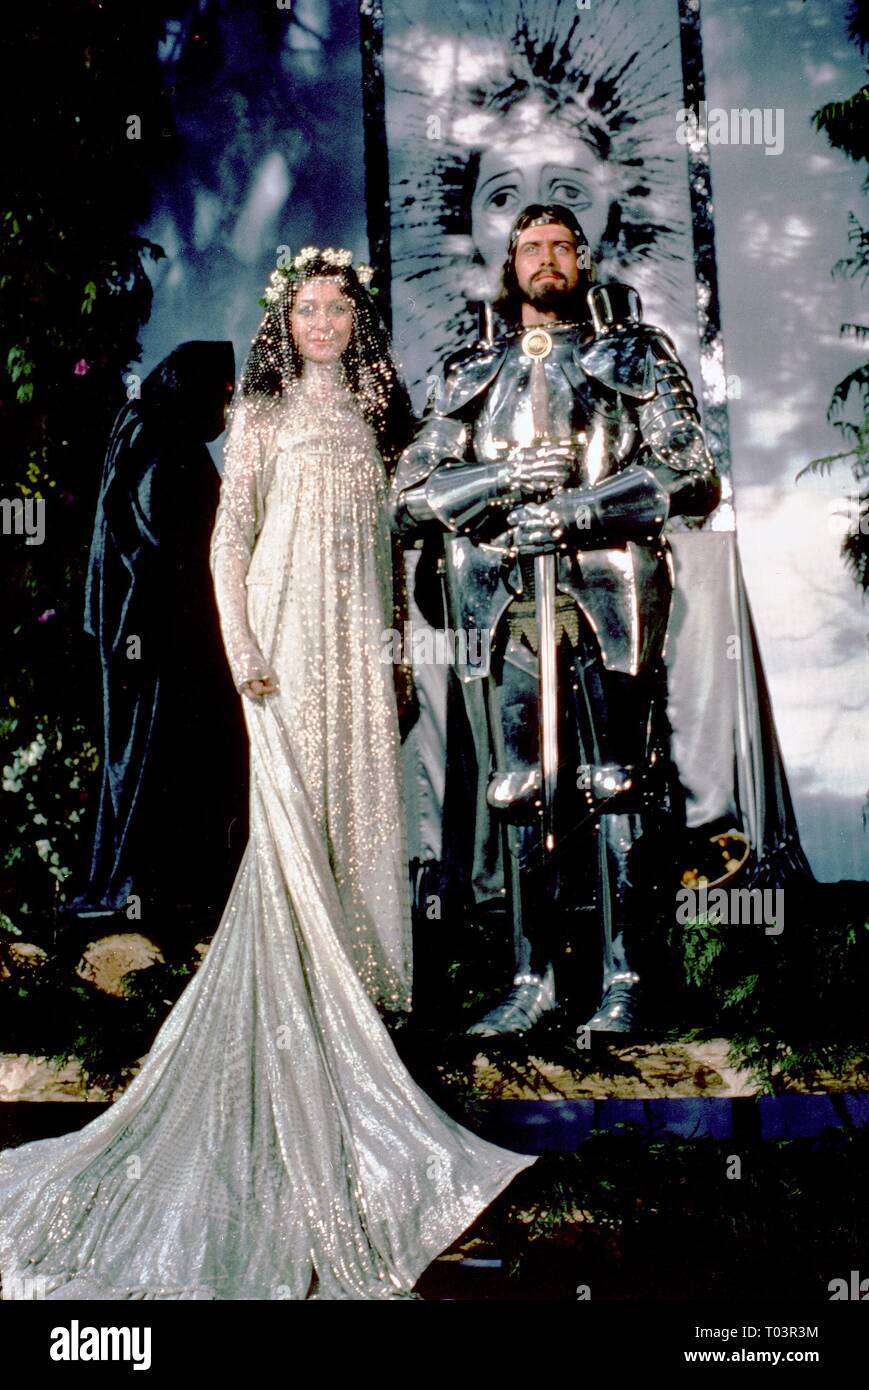 CHERIE LUNGHI, NIGEL TERRY, EXCALIBUR, 1981 Stock Photo